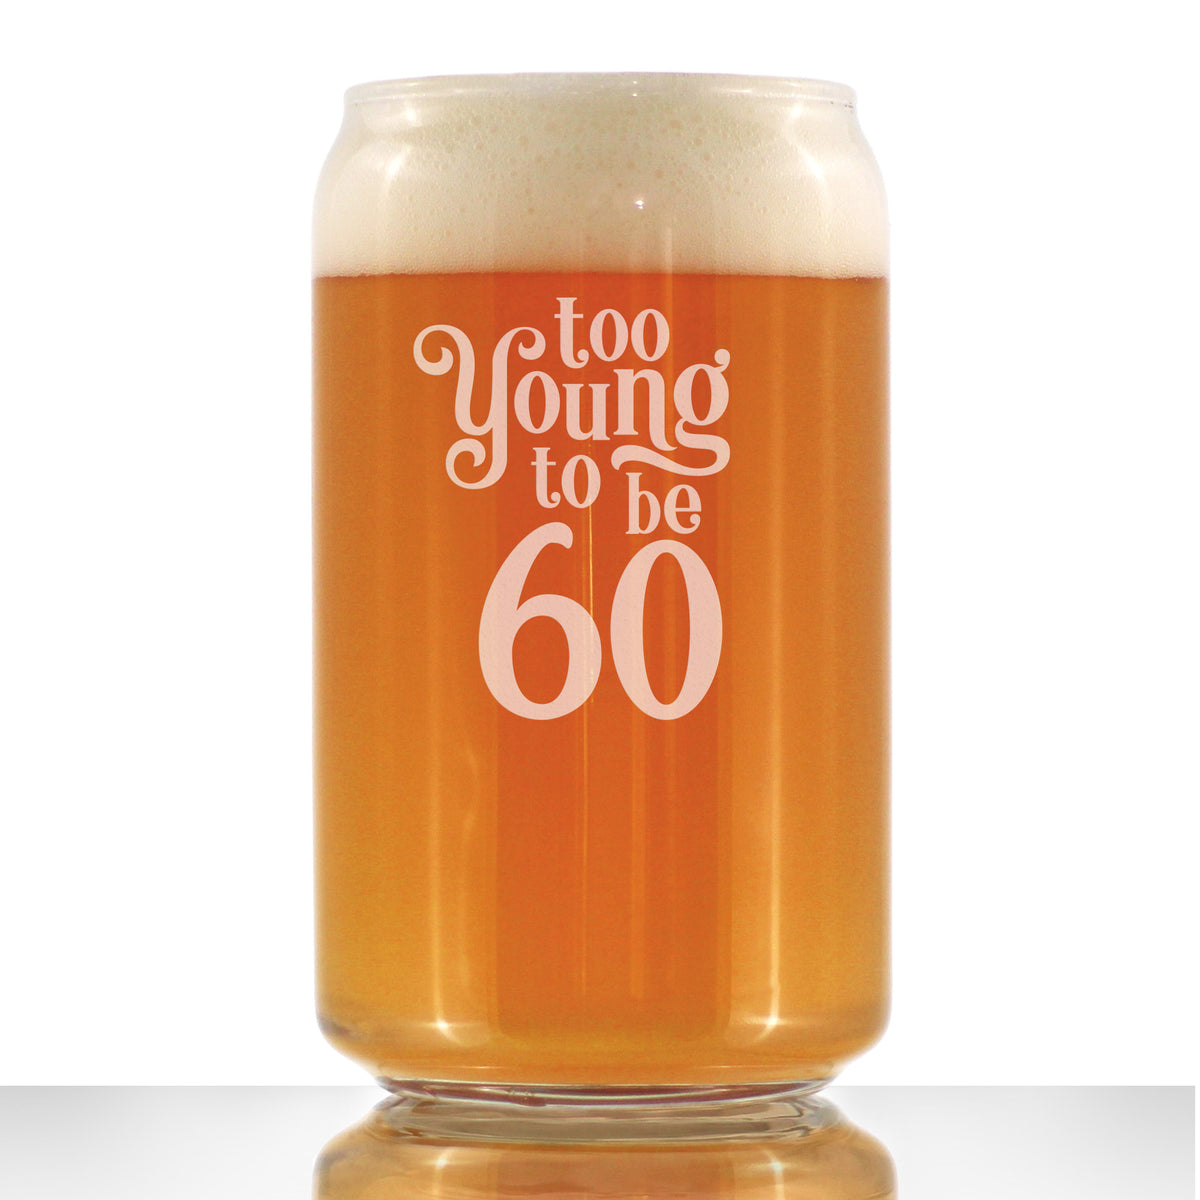 Too Young to Be 60 - Funny 16 oz Beer Can Pint Glass - 60th Birthday Gifts for Men or Women Turning 60 - Bday Party Decor